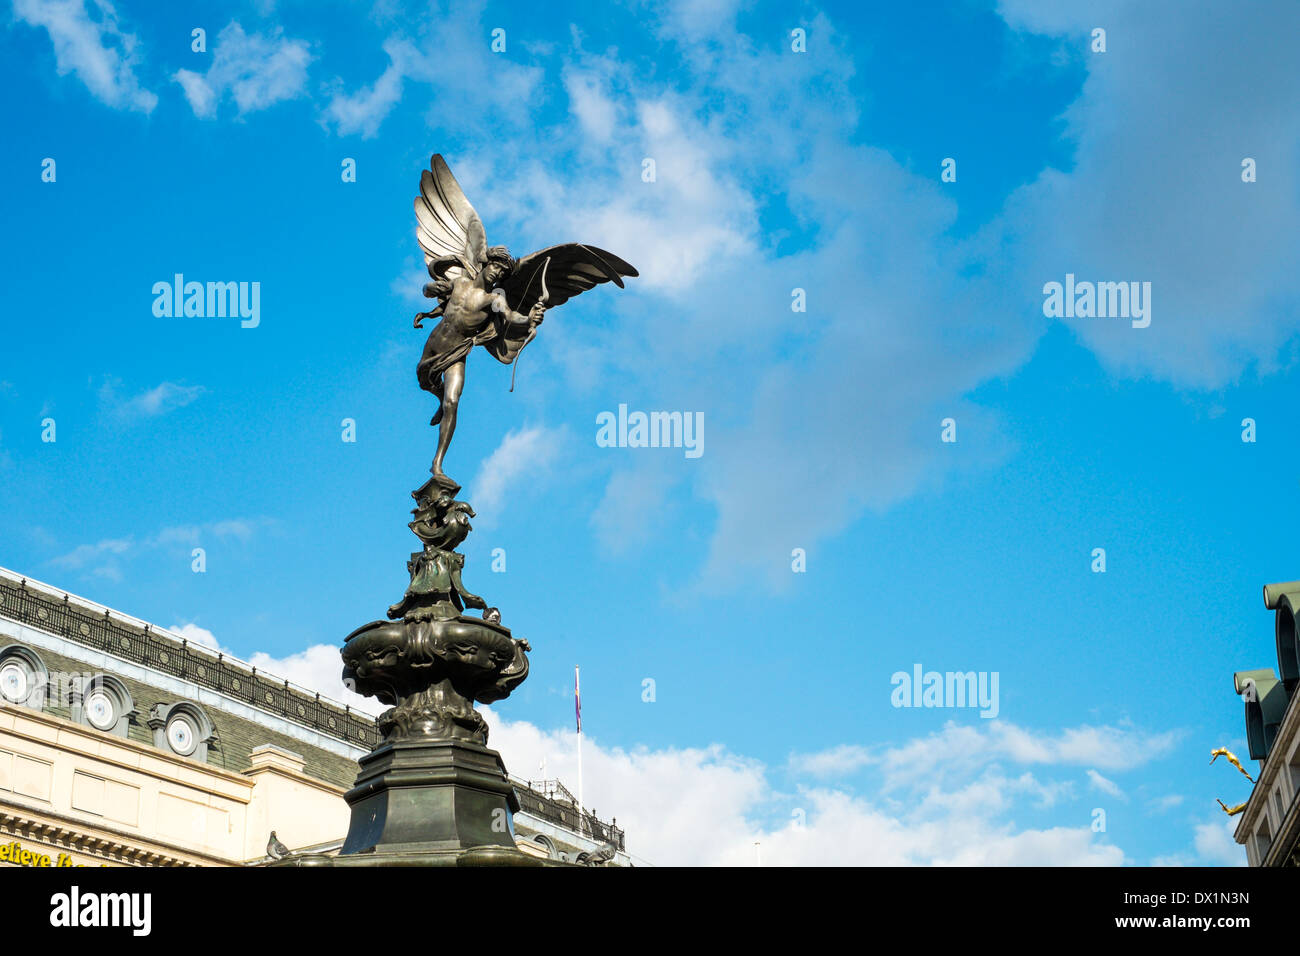 LONDON, UK - 14 März: Alfred Gilbert Statue des Eros am Piccadilly Circus. 1. März 2014 in London. Stockfoto